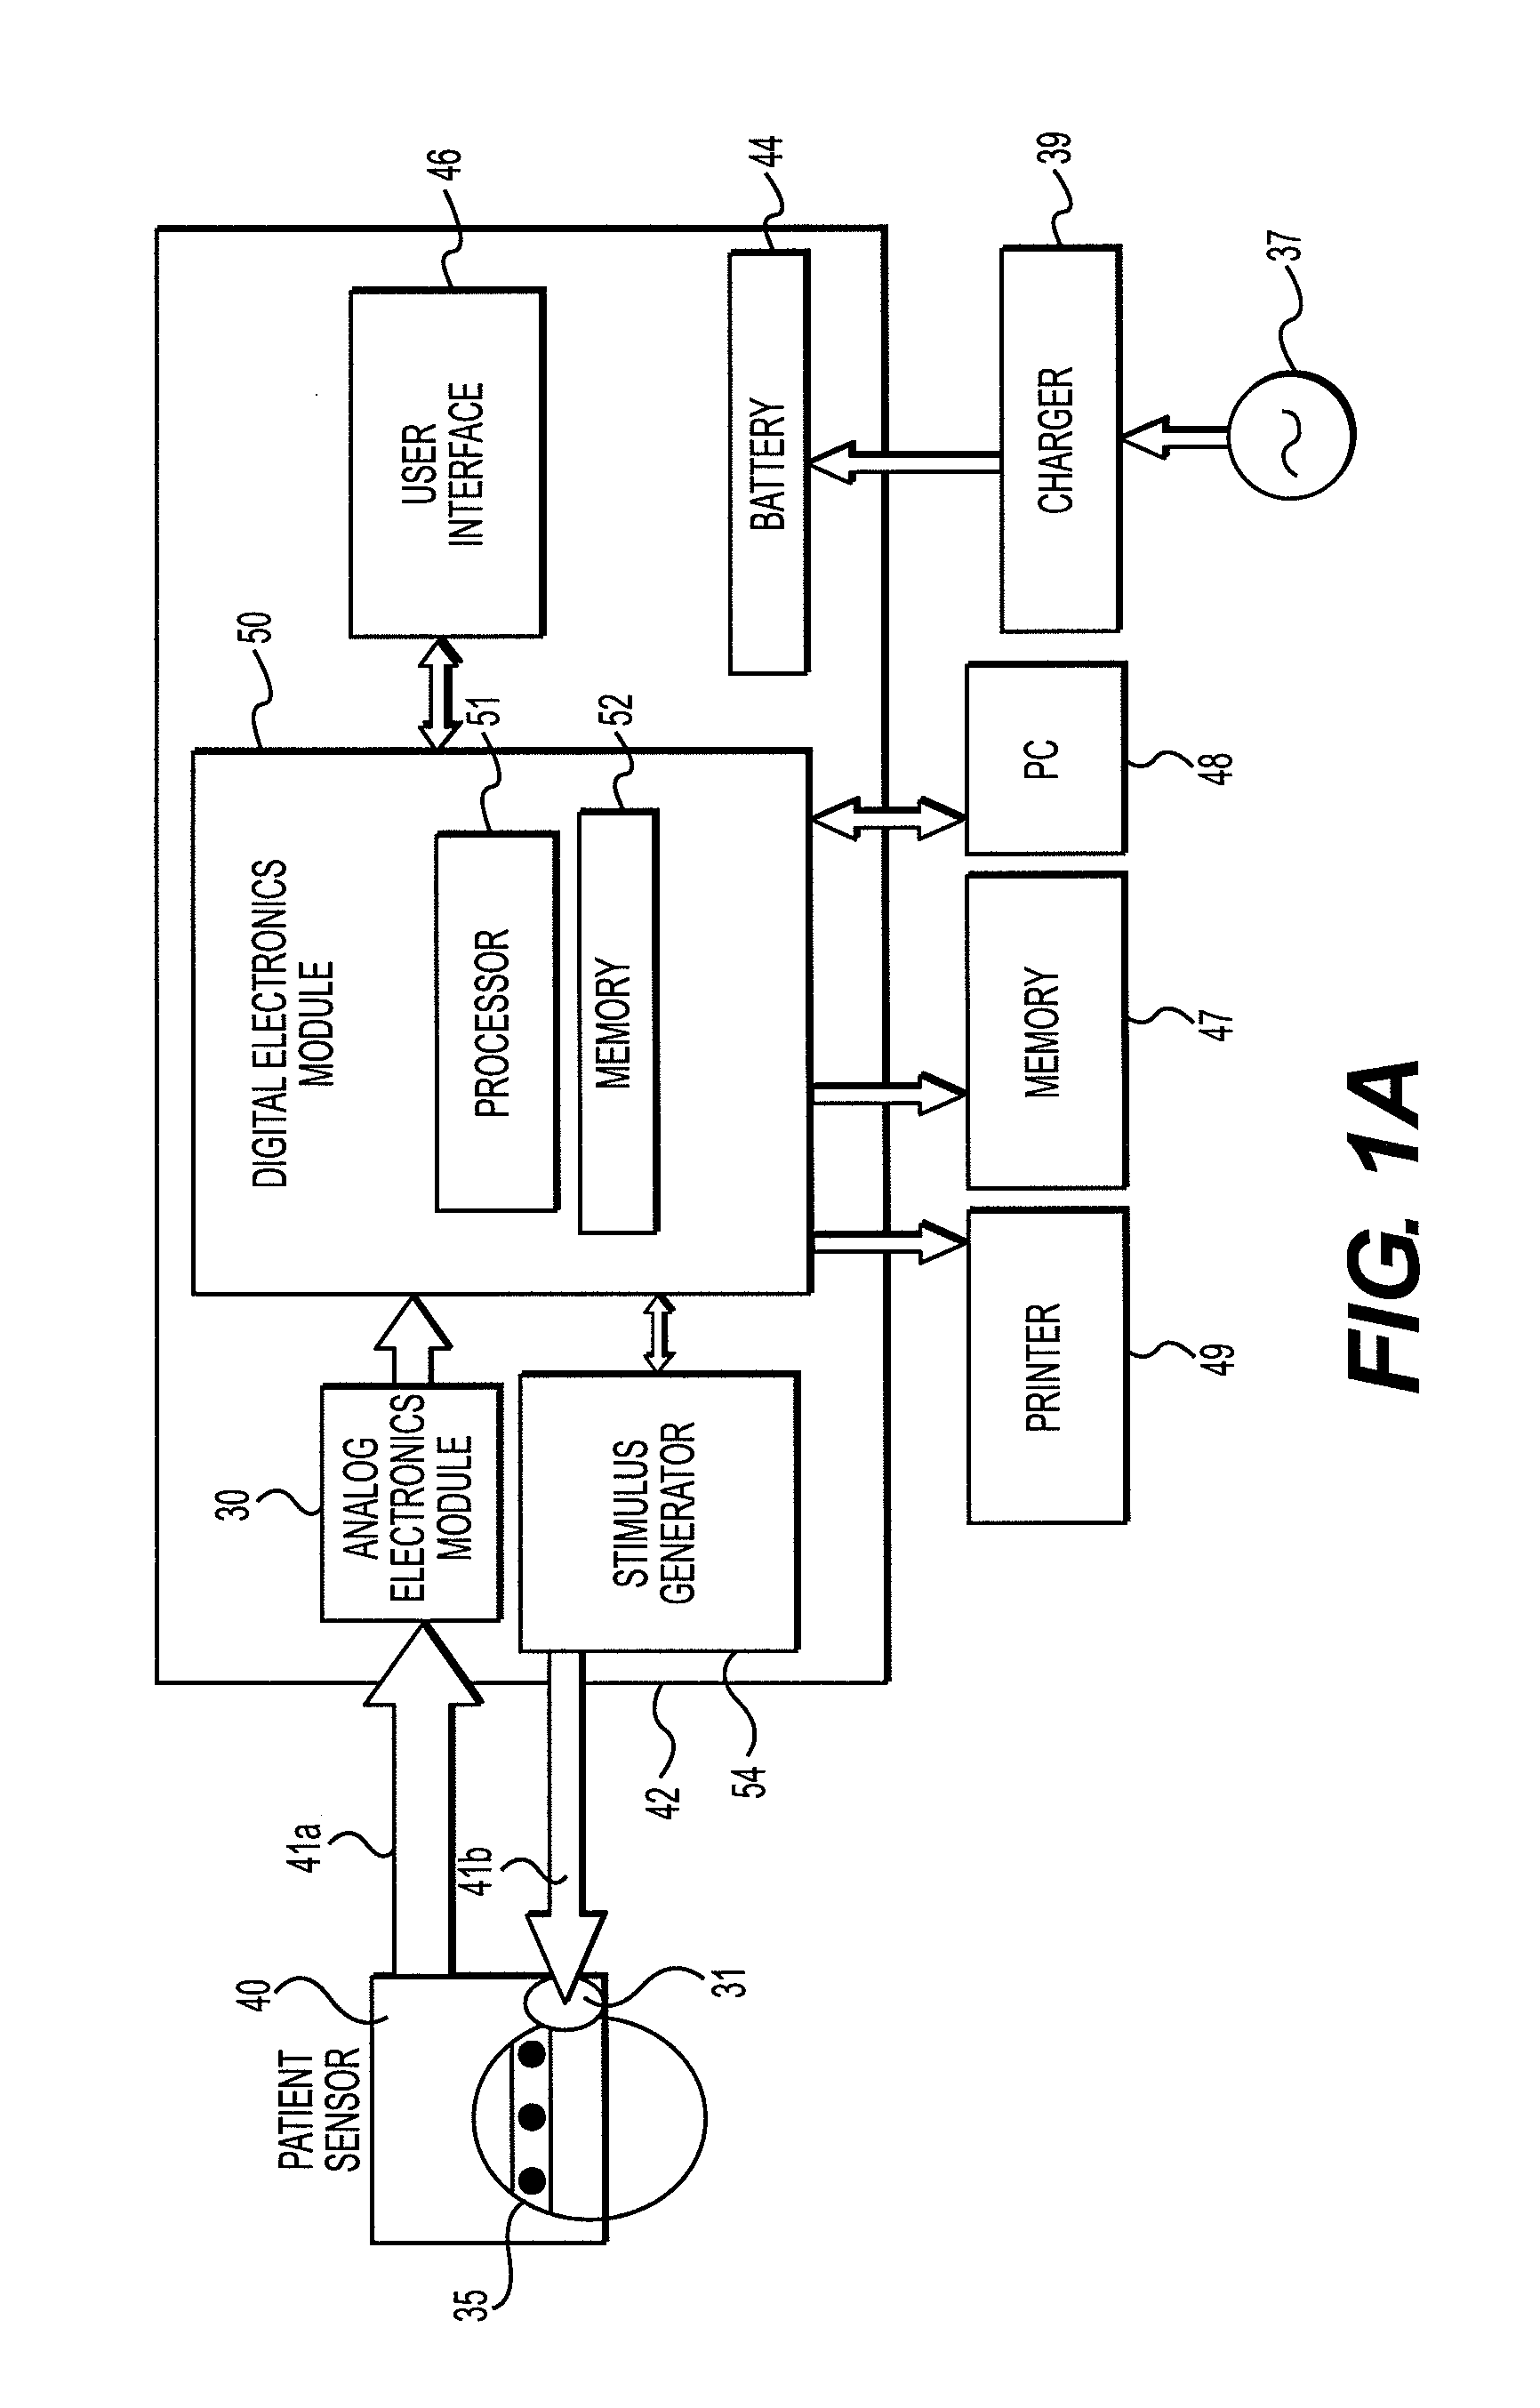 Method and device for point-of-care neuro-assessment and treatment guidance